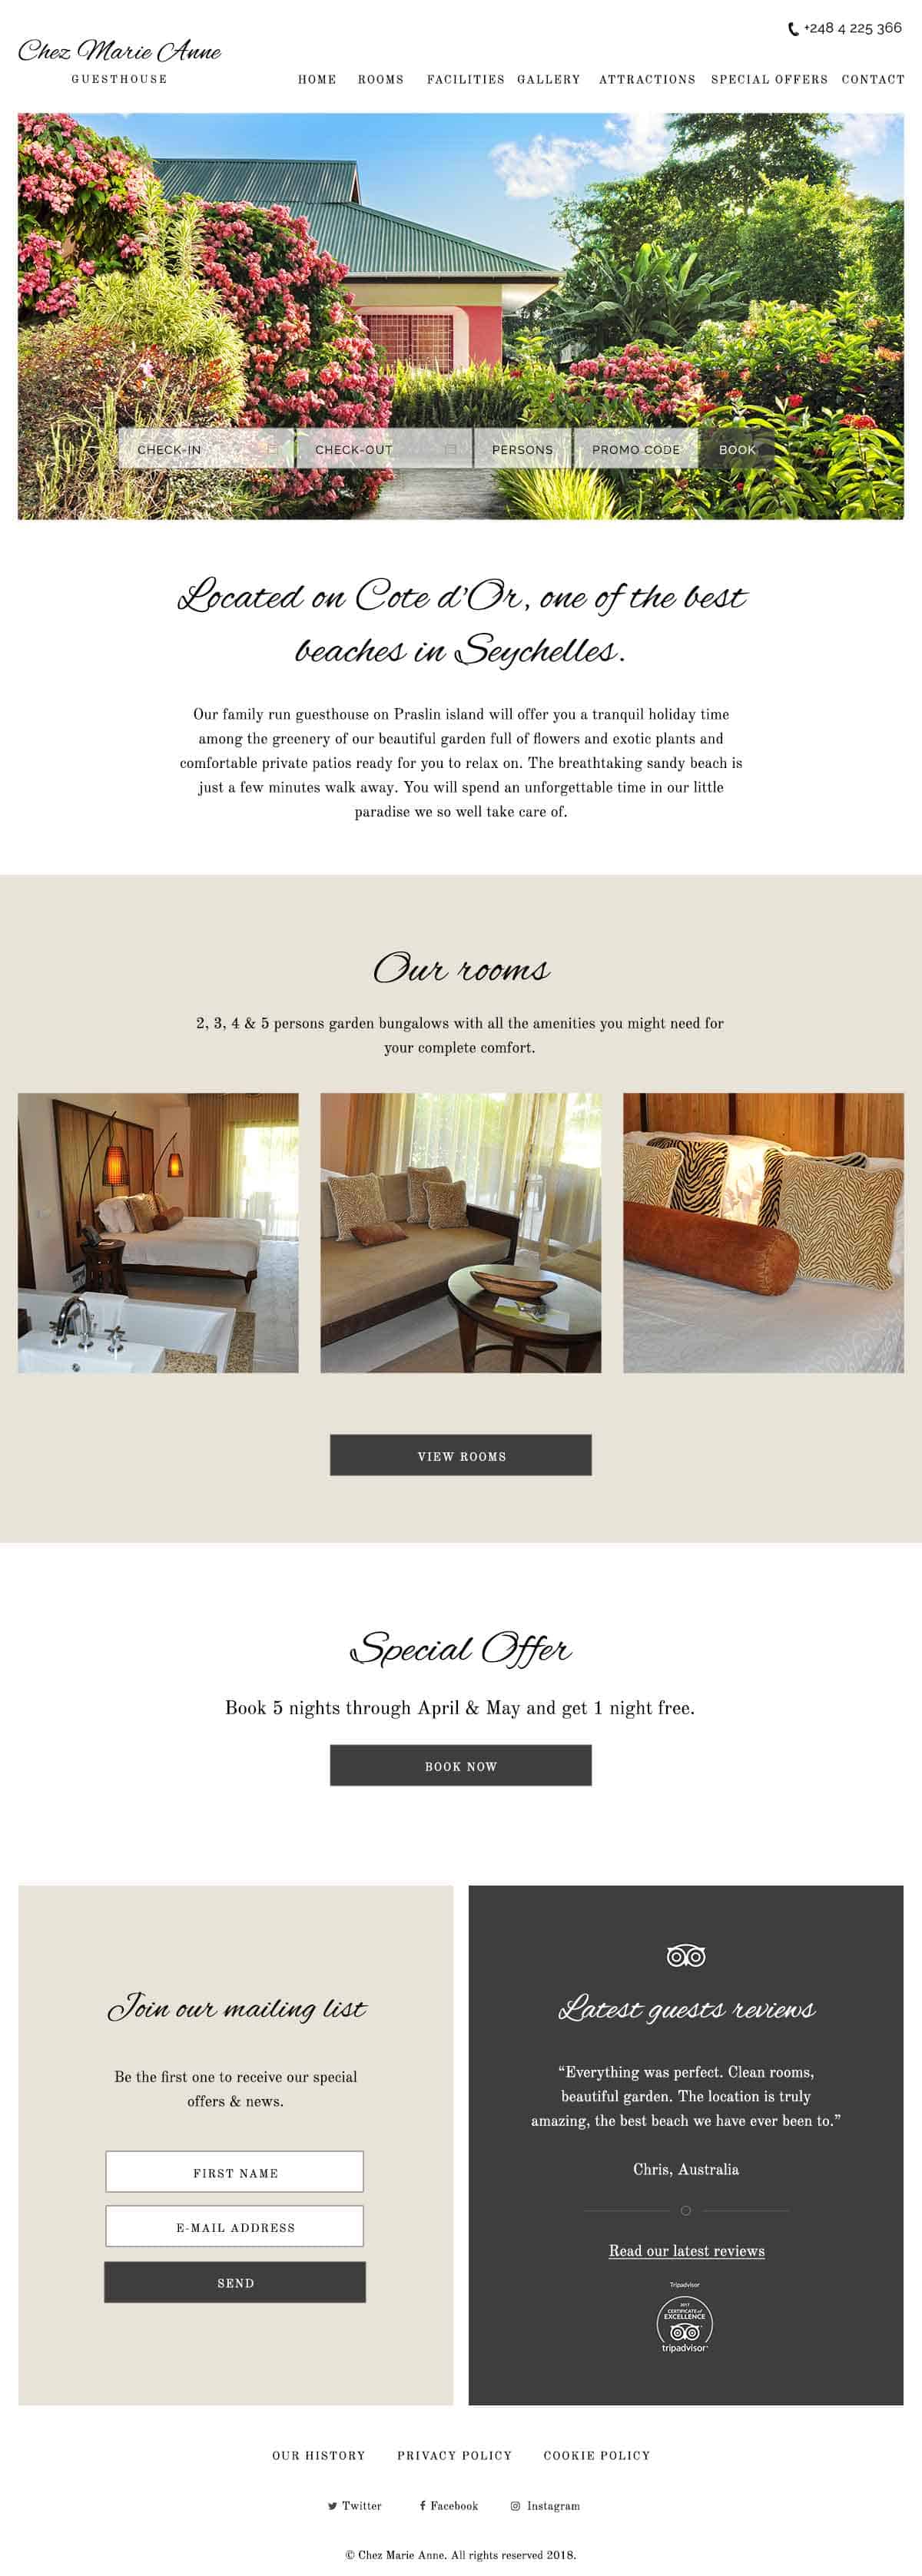 Hotel website design for a guesthouse in Seychelles